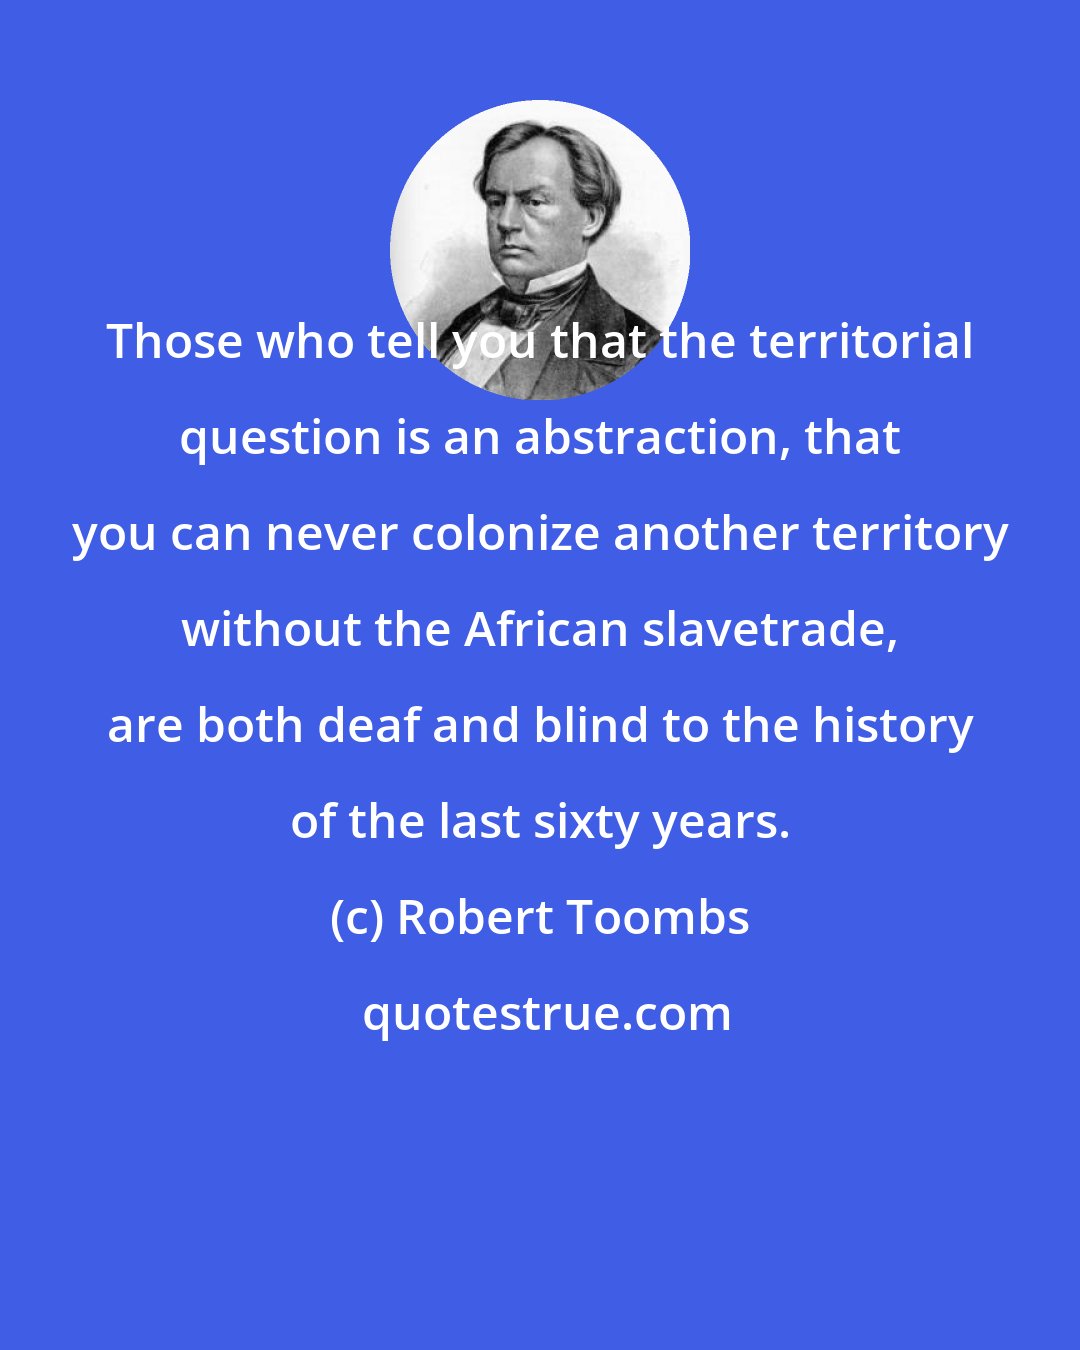 Robert Toombs: Those who tell you that the territorial question is an abstraction, that you can never colonize another territory without the African slavetrade, are both deaf and blind to the history of the last sixty years.